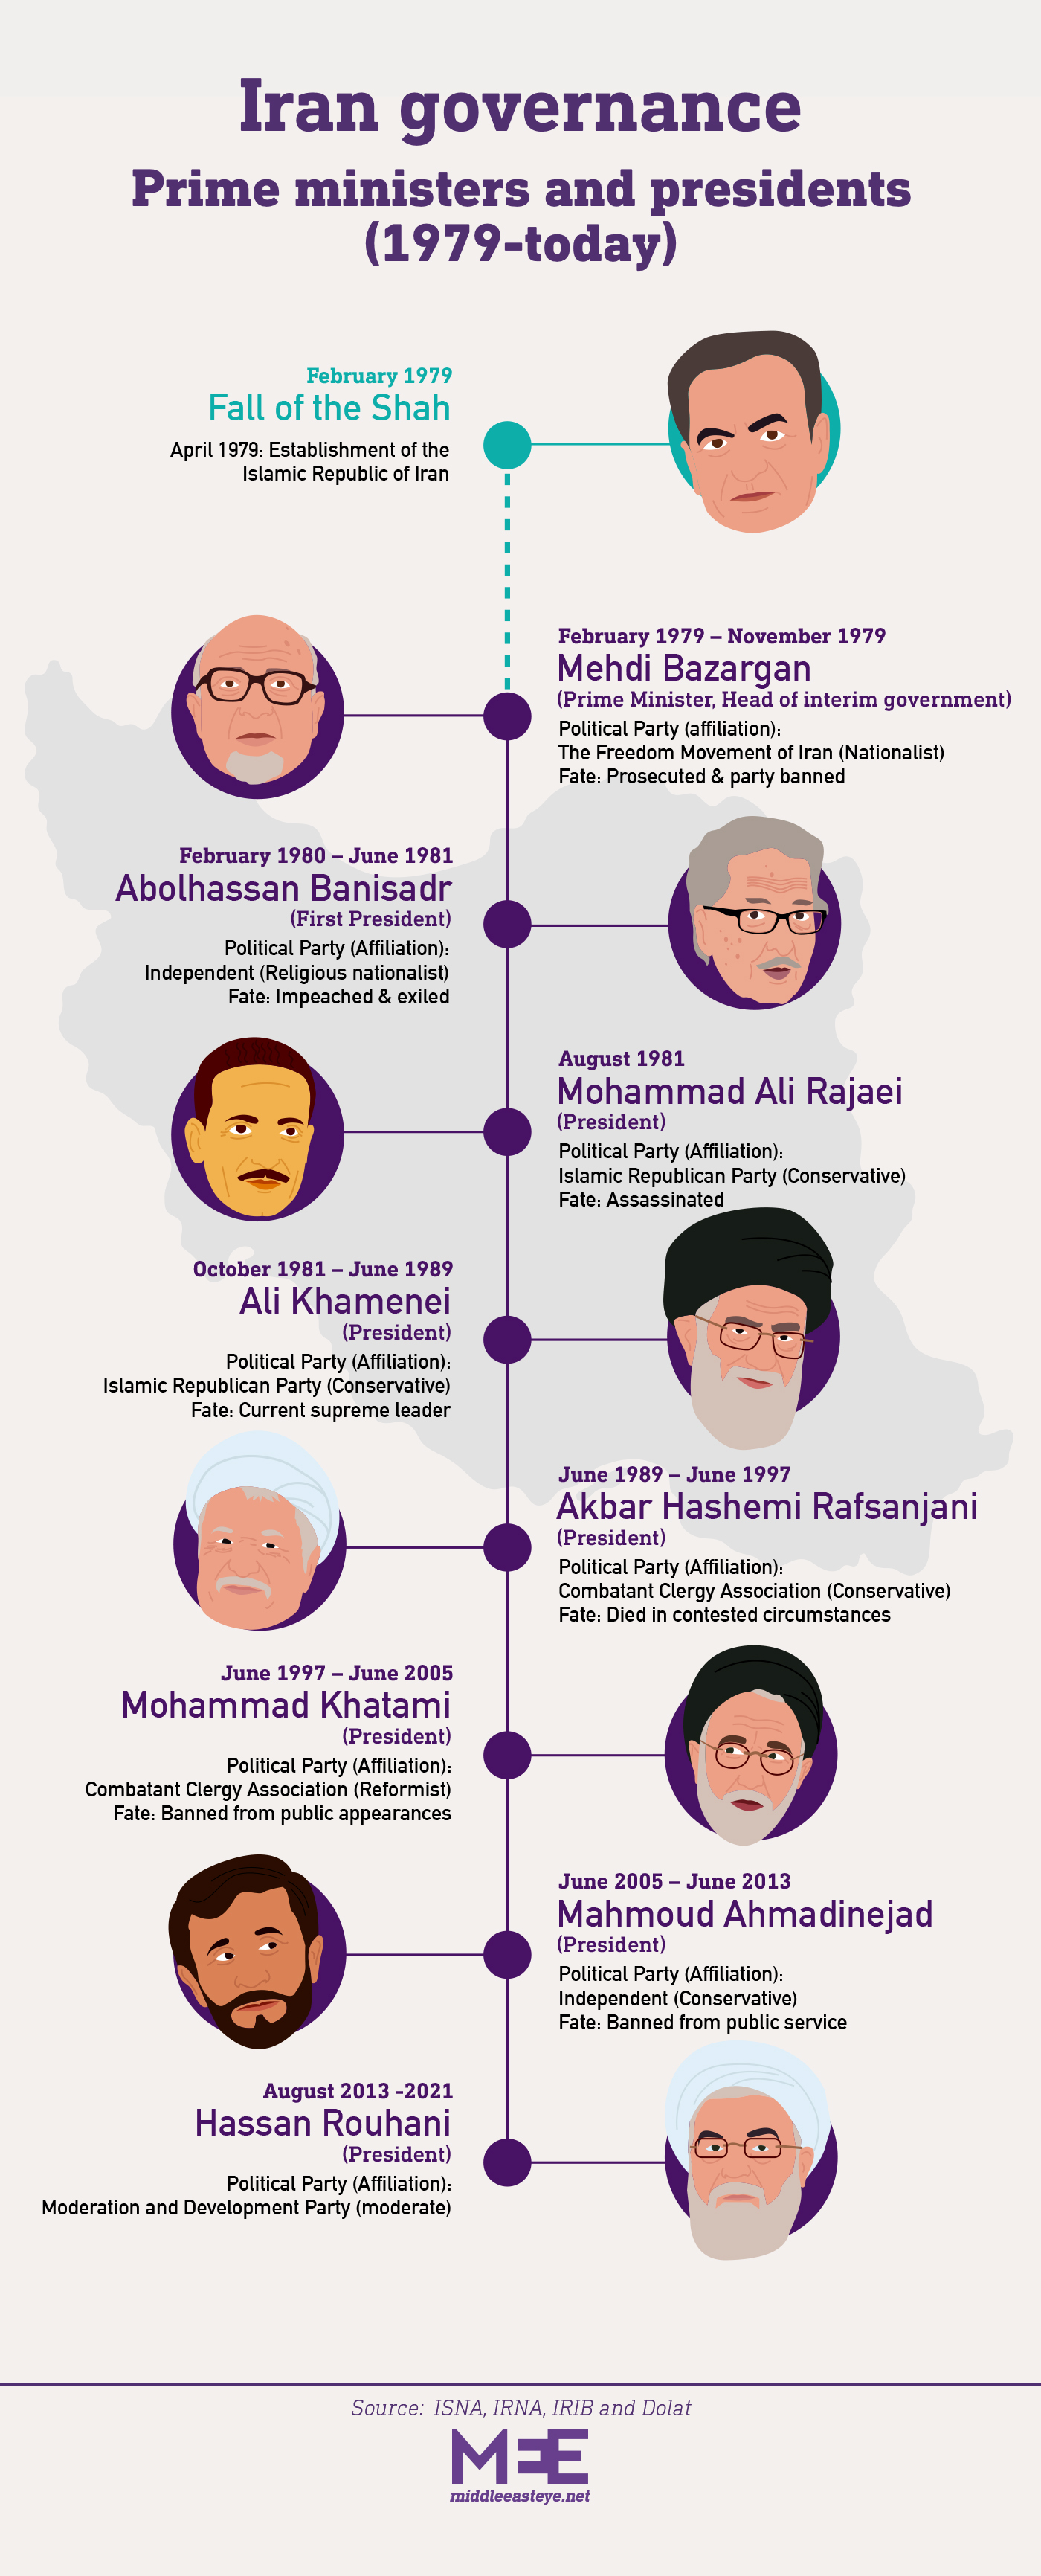 A timeline of prime ministers and presidents in Iran's Islamic Republic, from 1929 to 2021 (MEE)